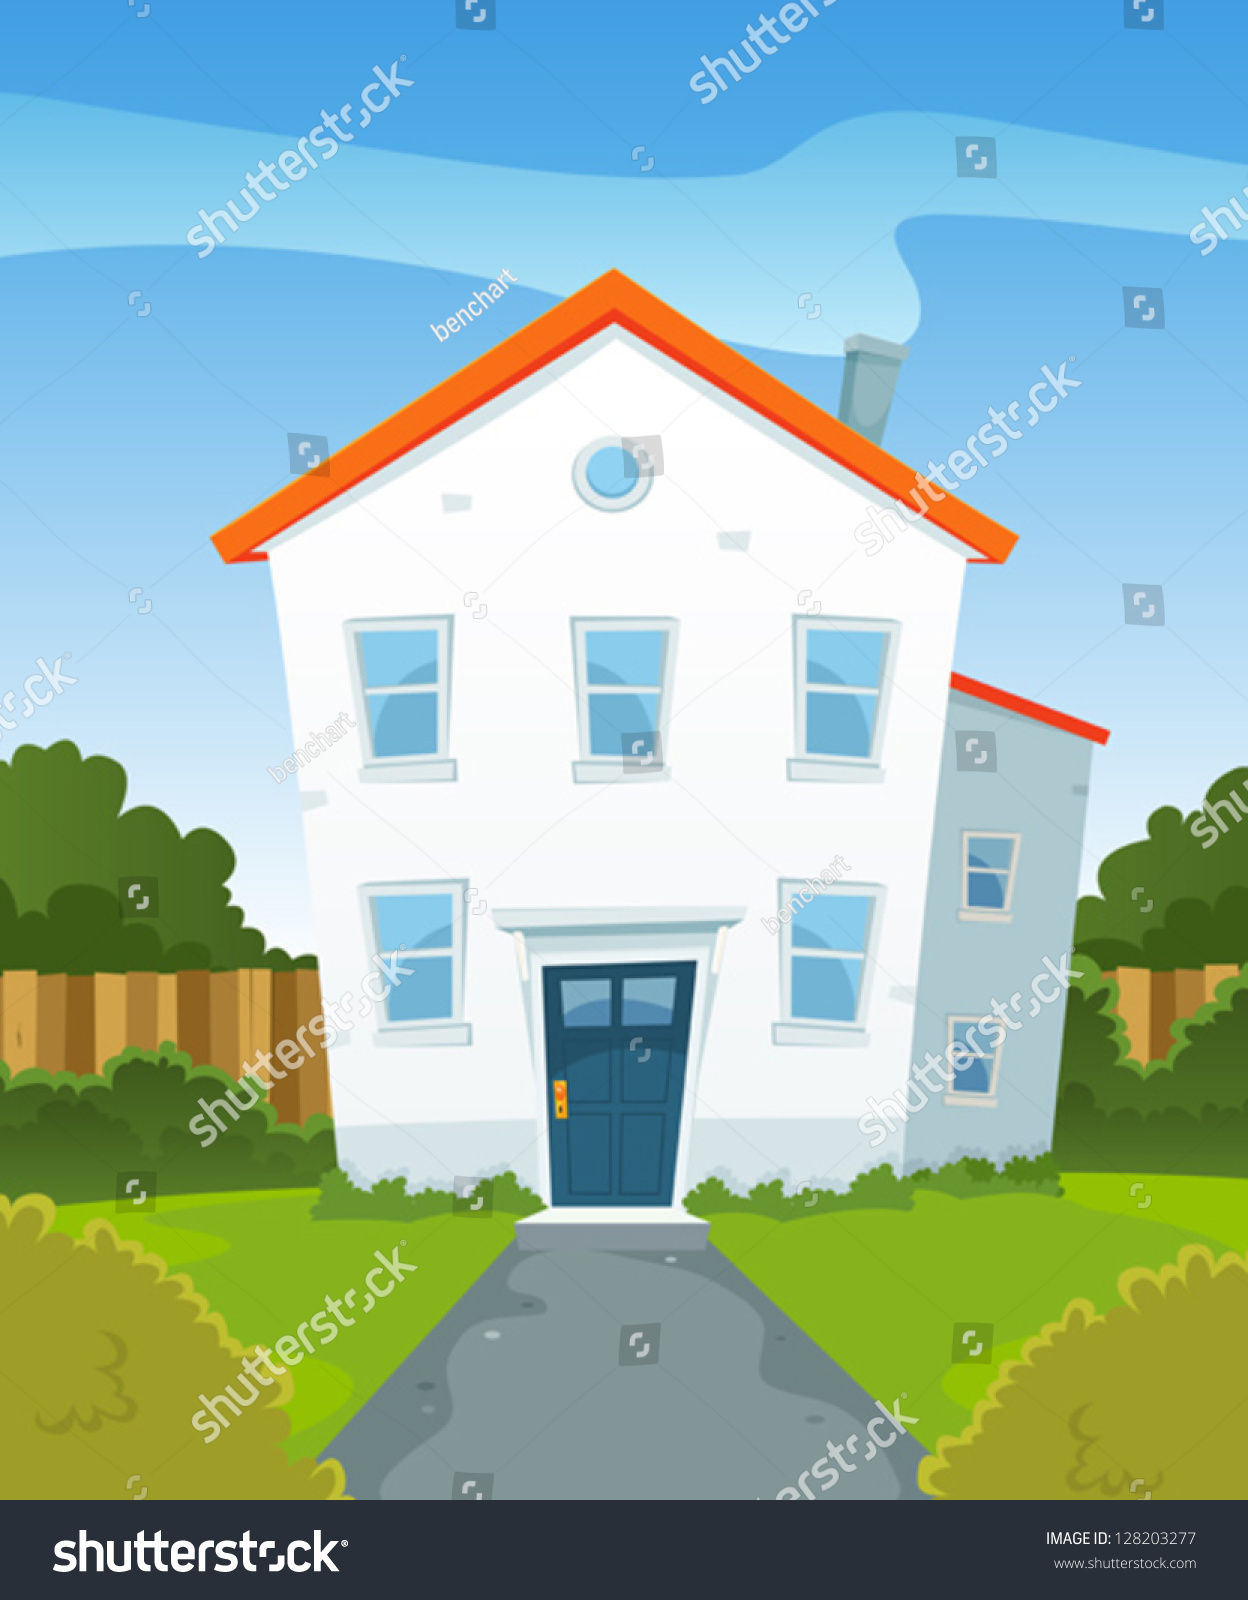 house with garden clipart - photo #22